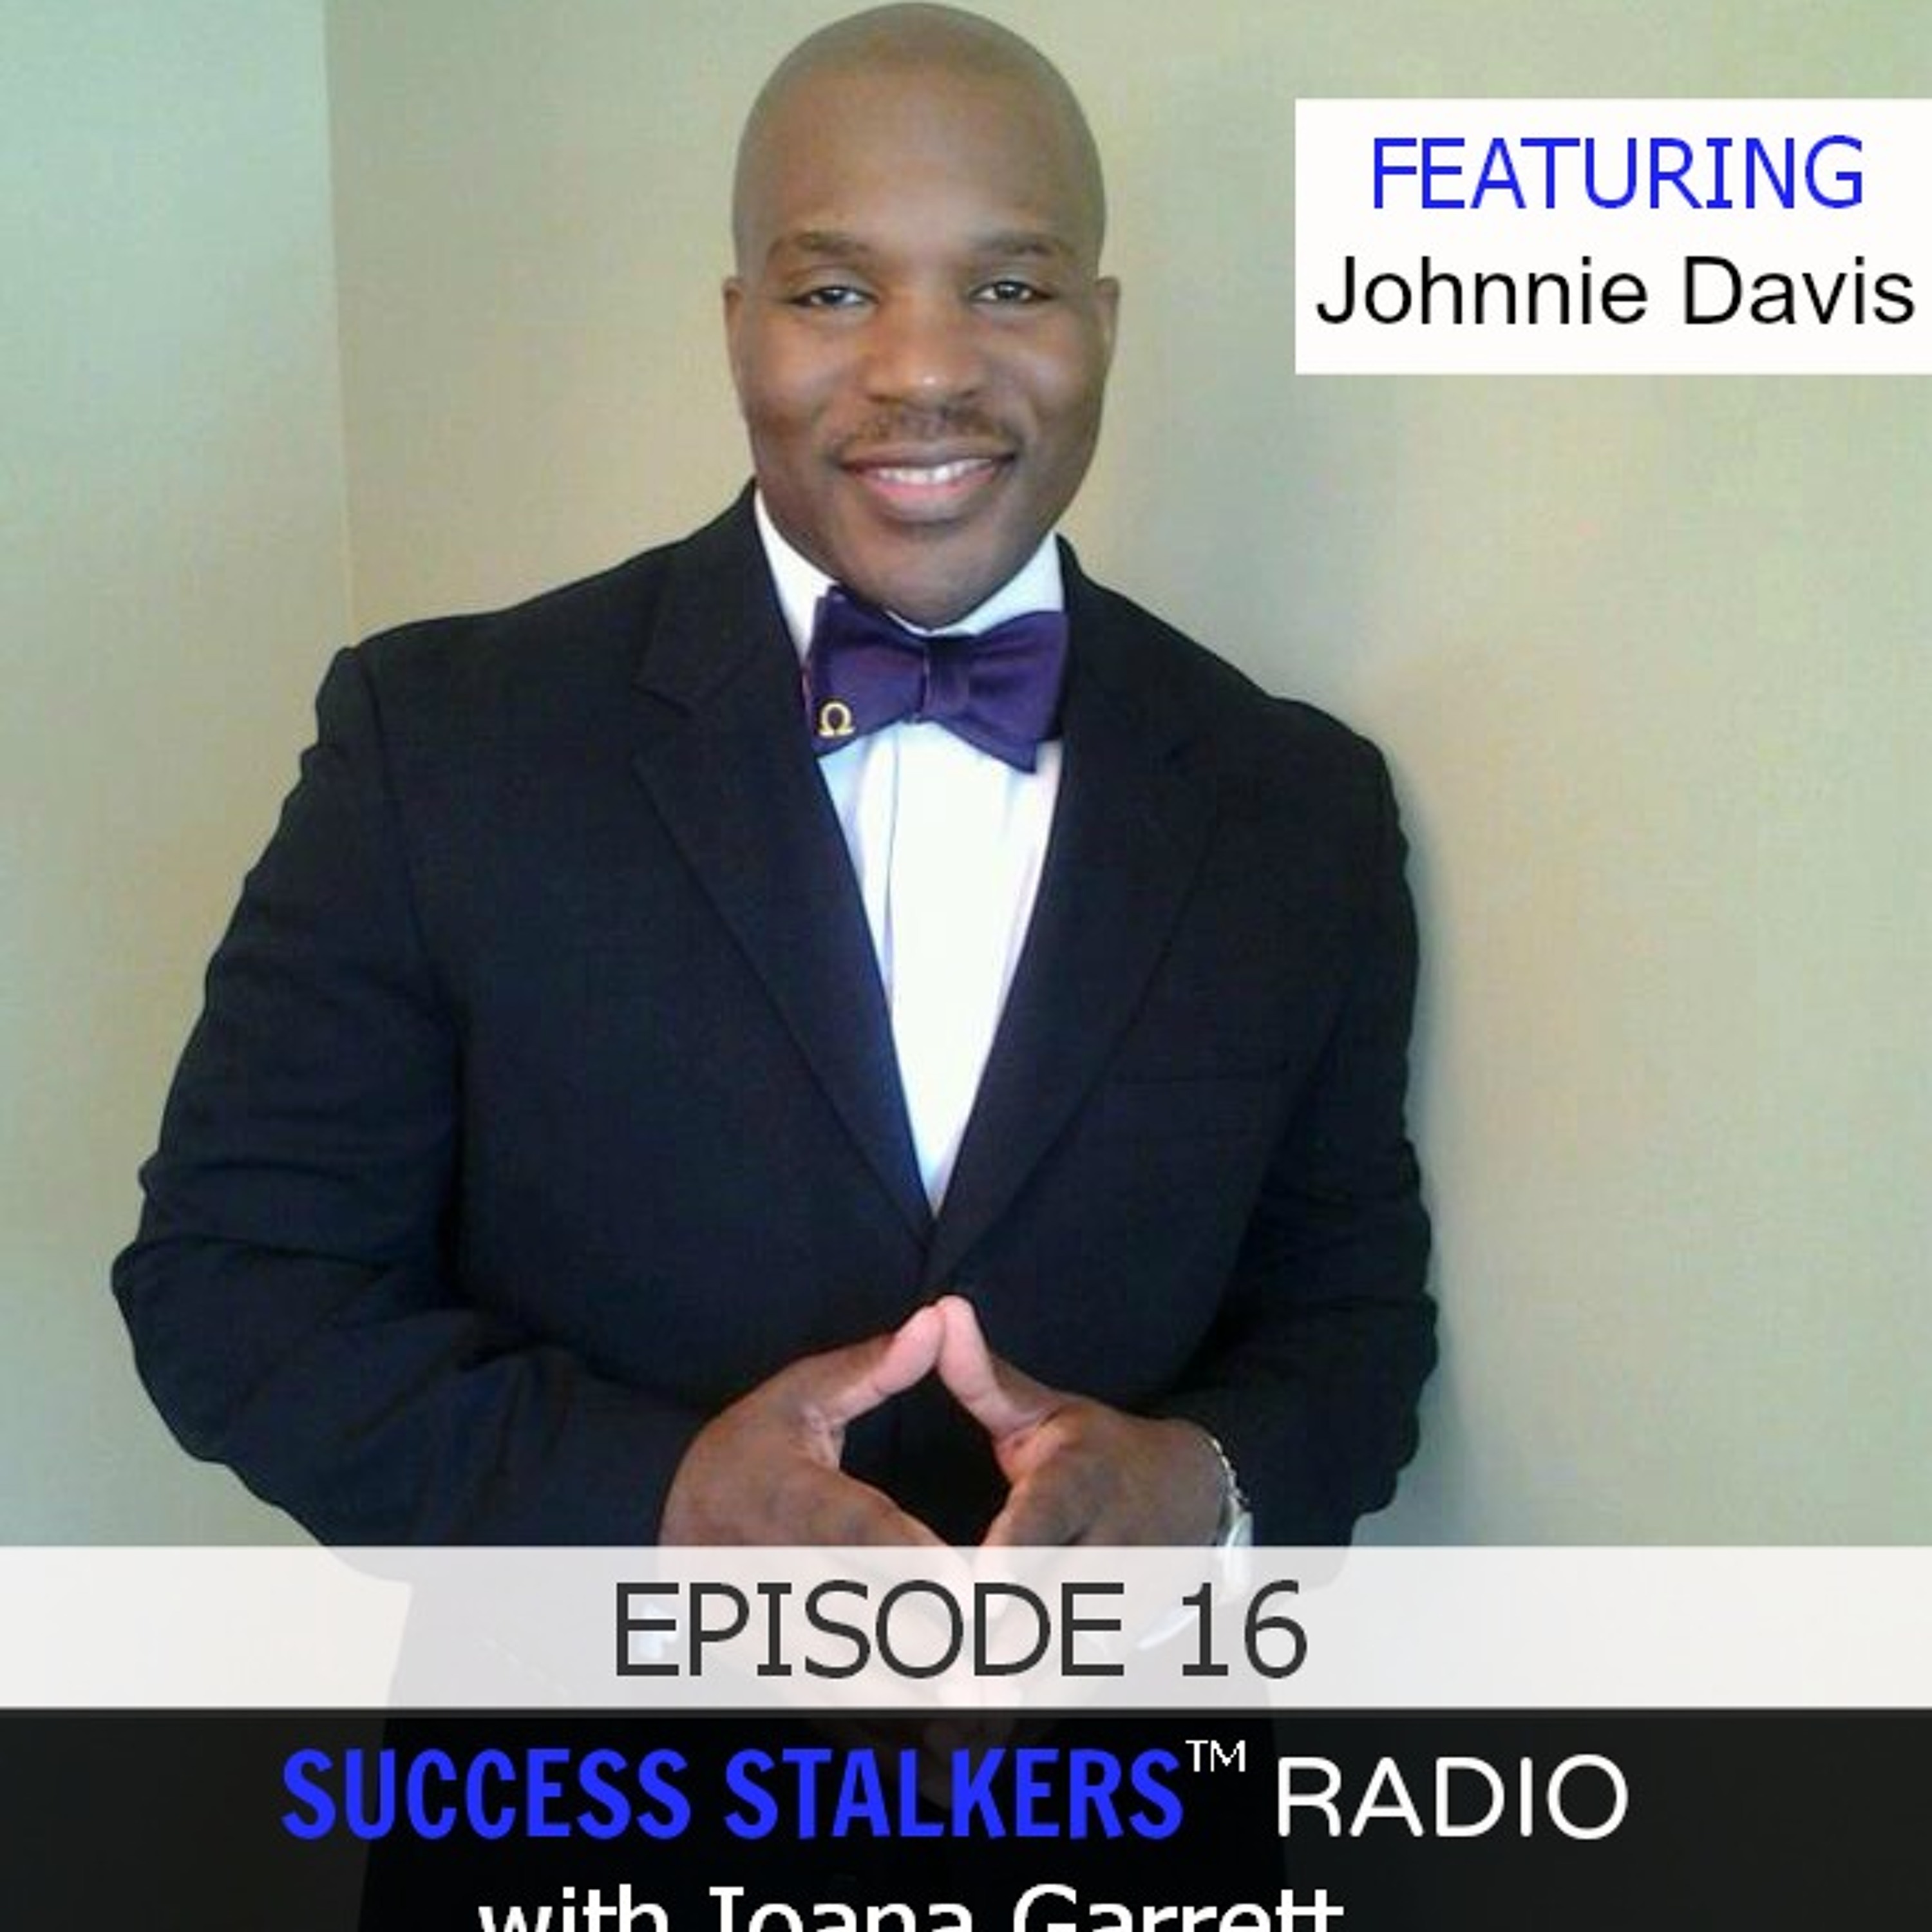 16: Johnnie Davis: Business Coach and Global Expansion Leader Shares His Success Journey Image